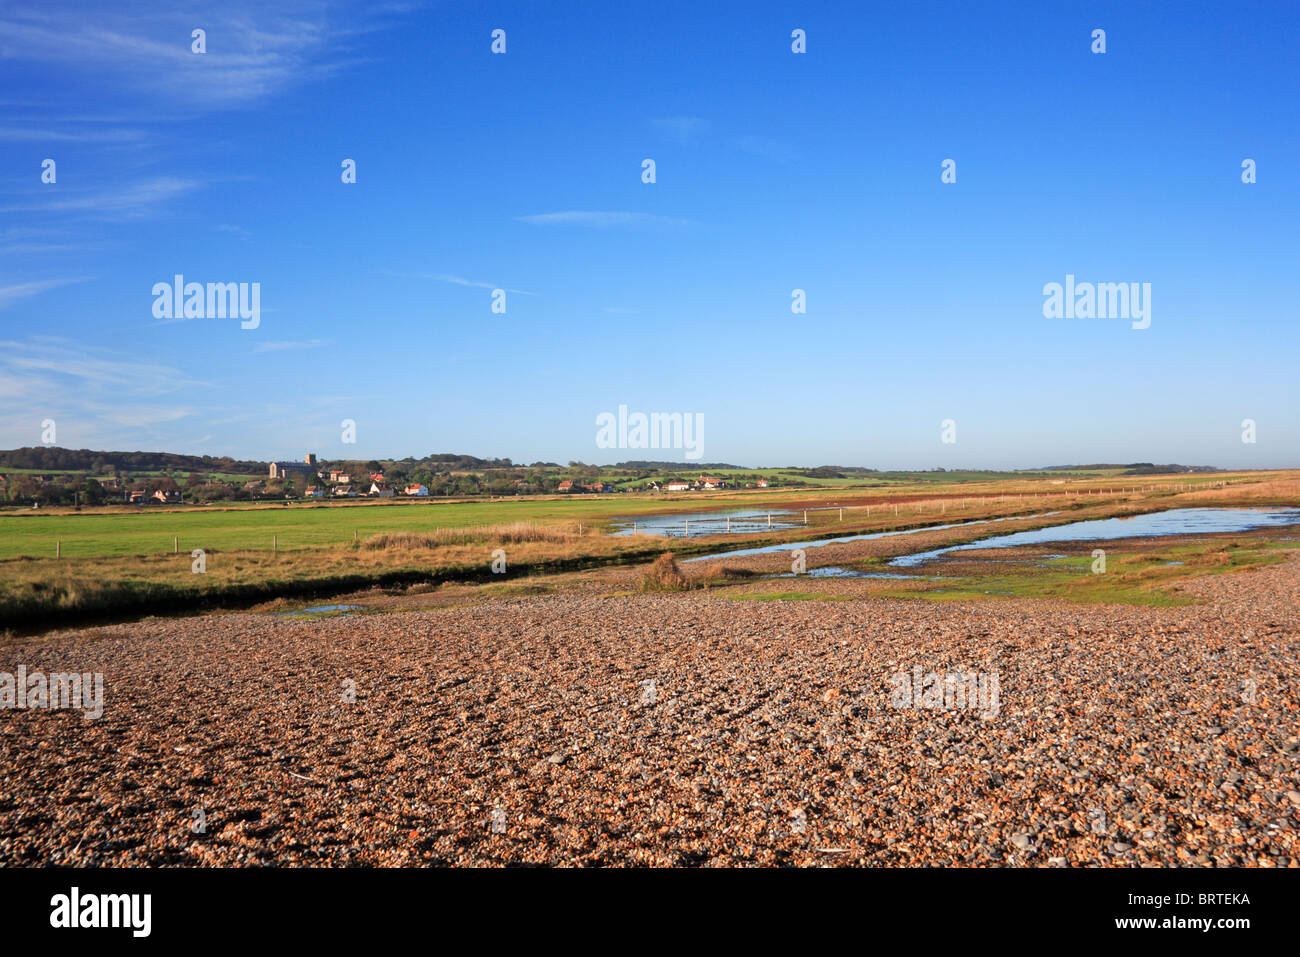 A view of Salthouse Marshes with the village of Salthouse, Norfolk, England, United Kingdom, in the background. Stock Photo